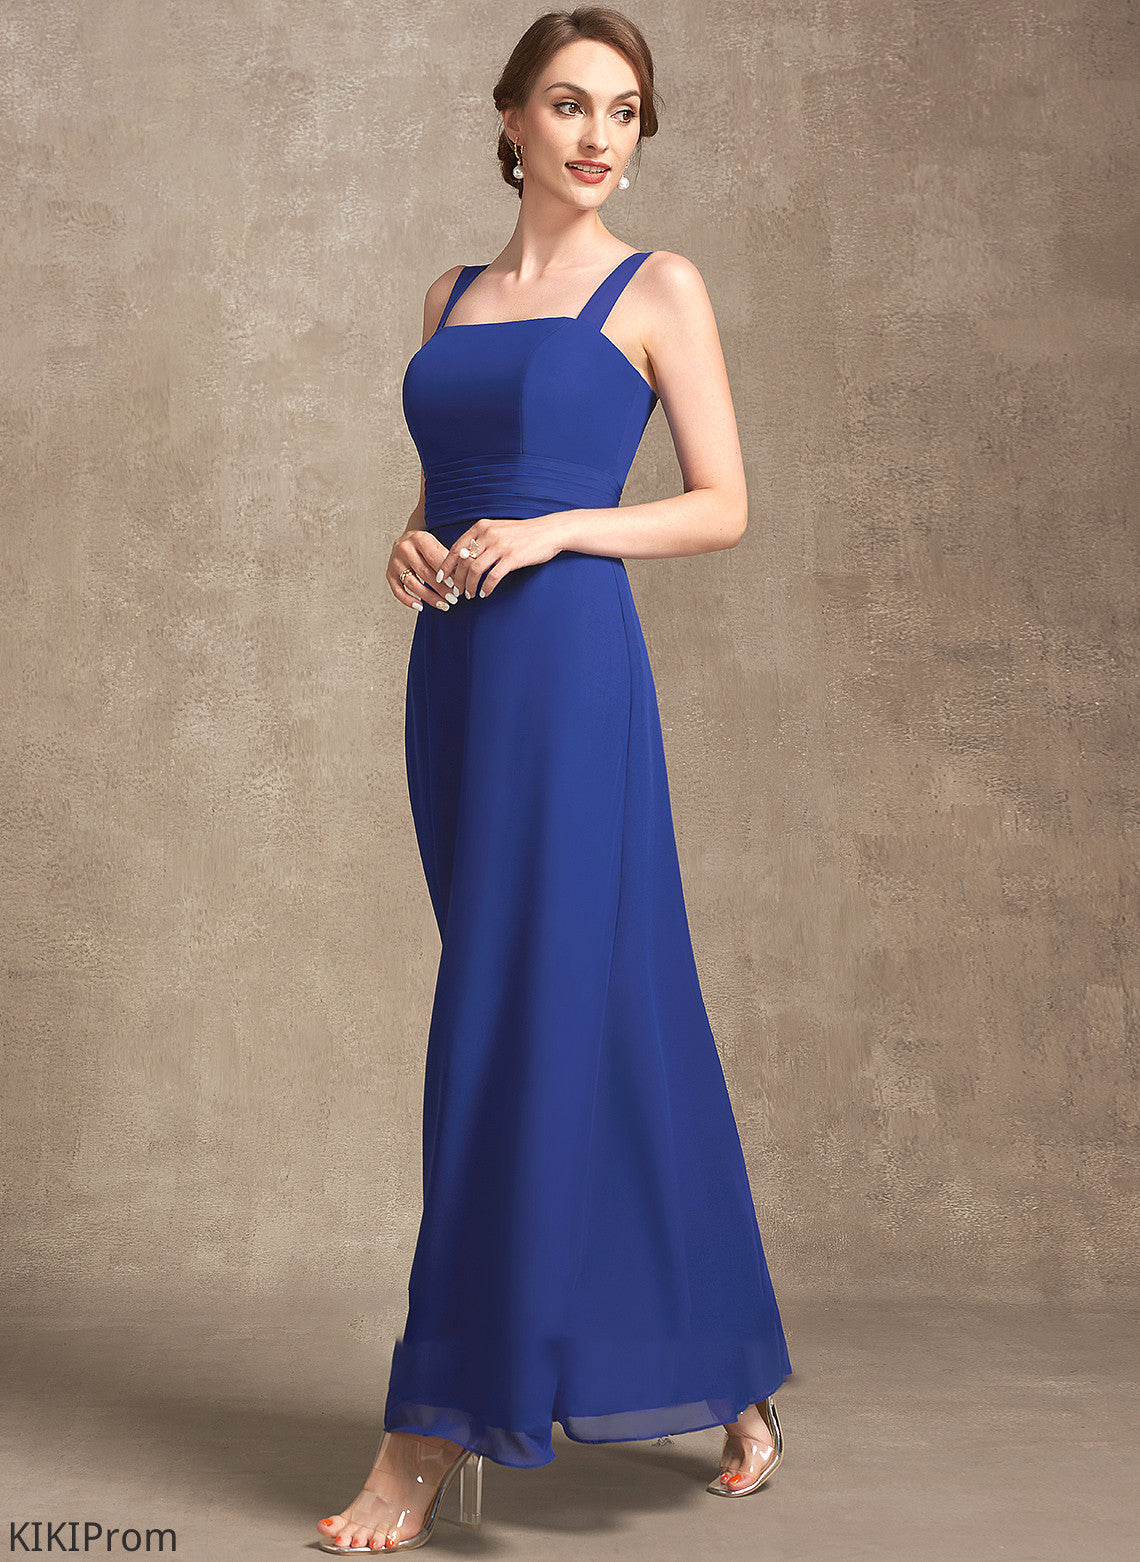 Neckline Bride Ruffle of Mother of the Bride Dresses Mother Diamond the Chiffon Dress Square Ankle-Length With A-Line